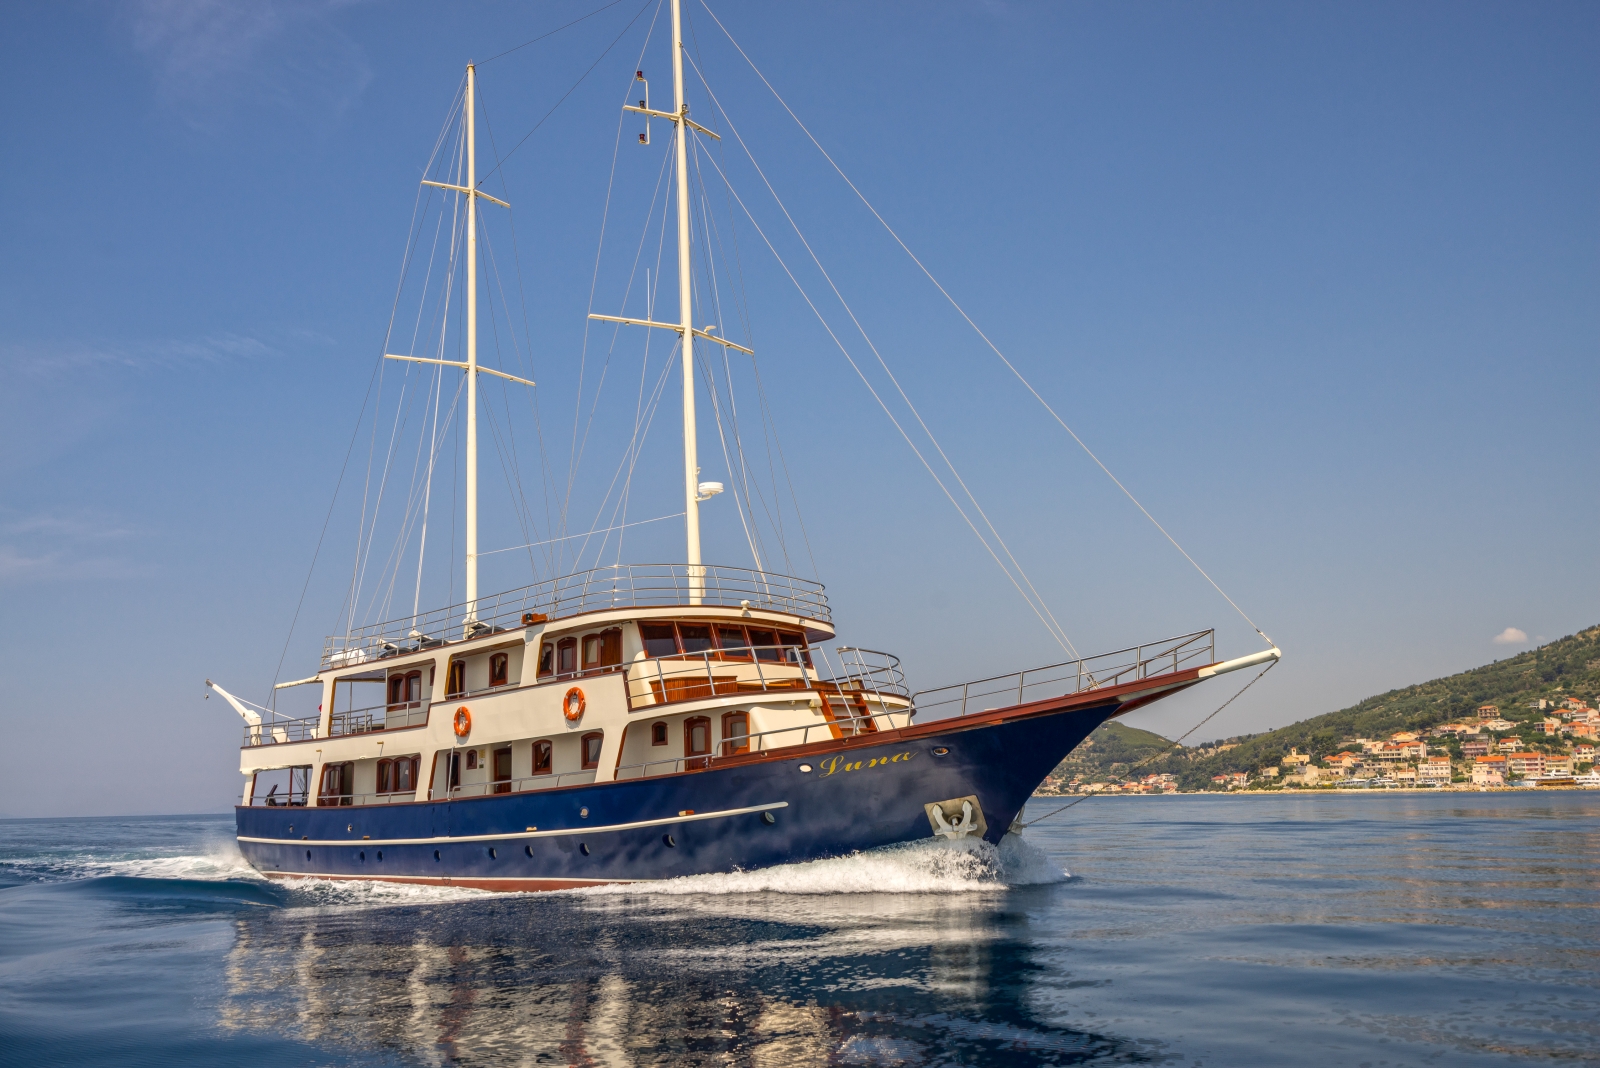 View of luxury gulet Luna from the front while sailing